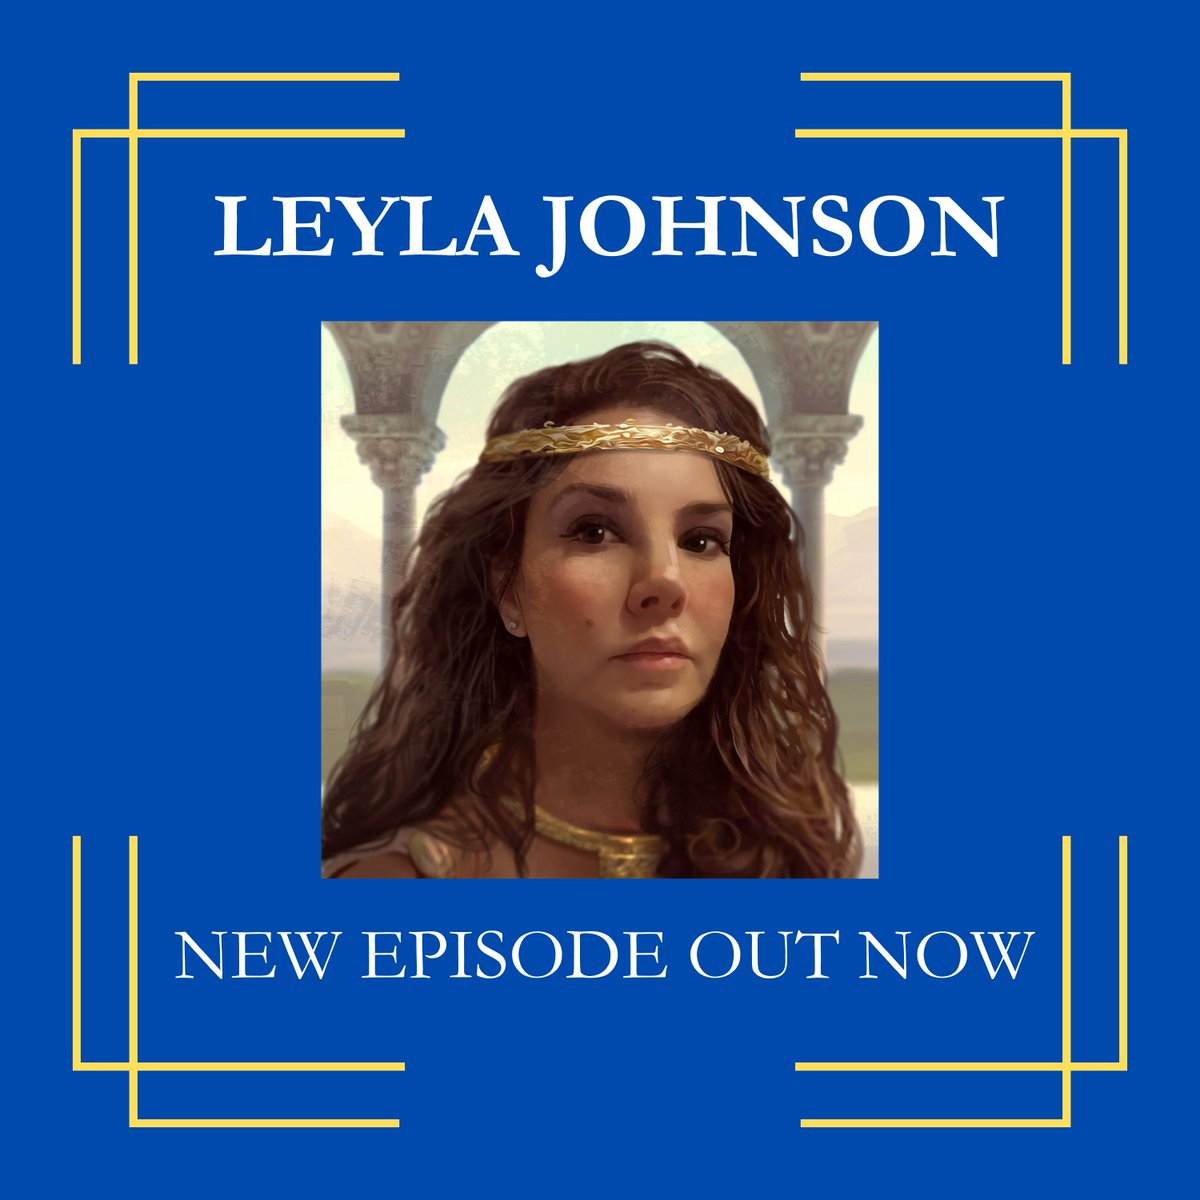 On today's episode @LeylaCatJ, of @mohawkgames, joins Lexie to discuss her experience growing up in Lebanon with a love for history, researching Cyrus the Great for her game 'Old World', and working with a composer to achieve an authentic/culturally appropriate game soundtrack.